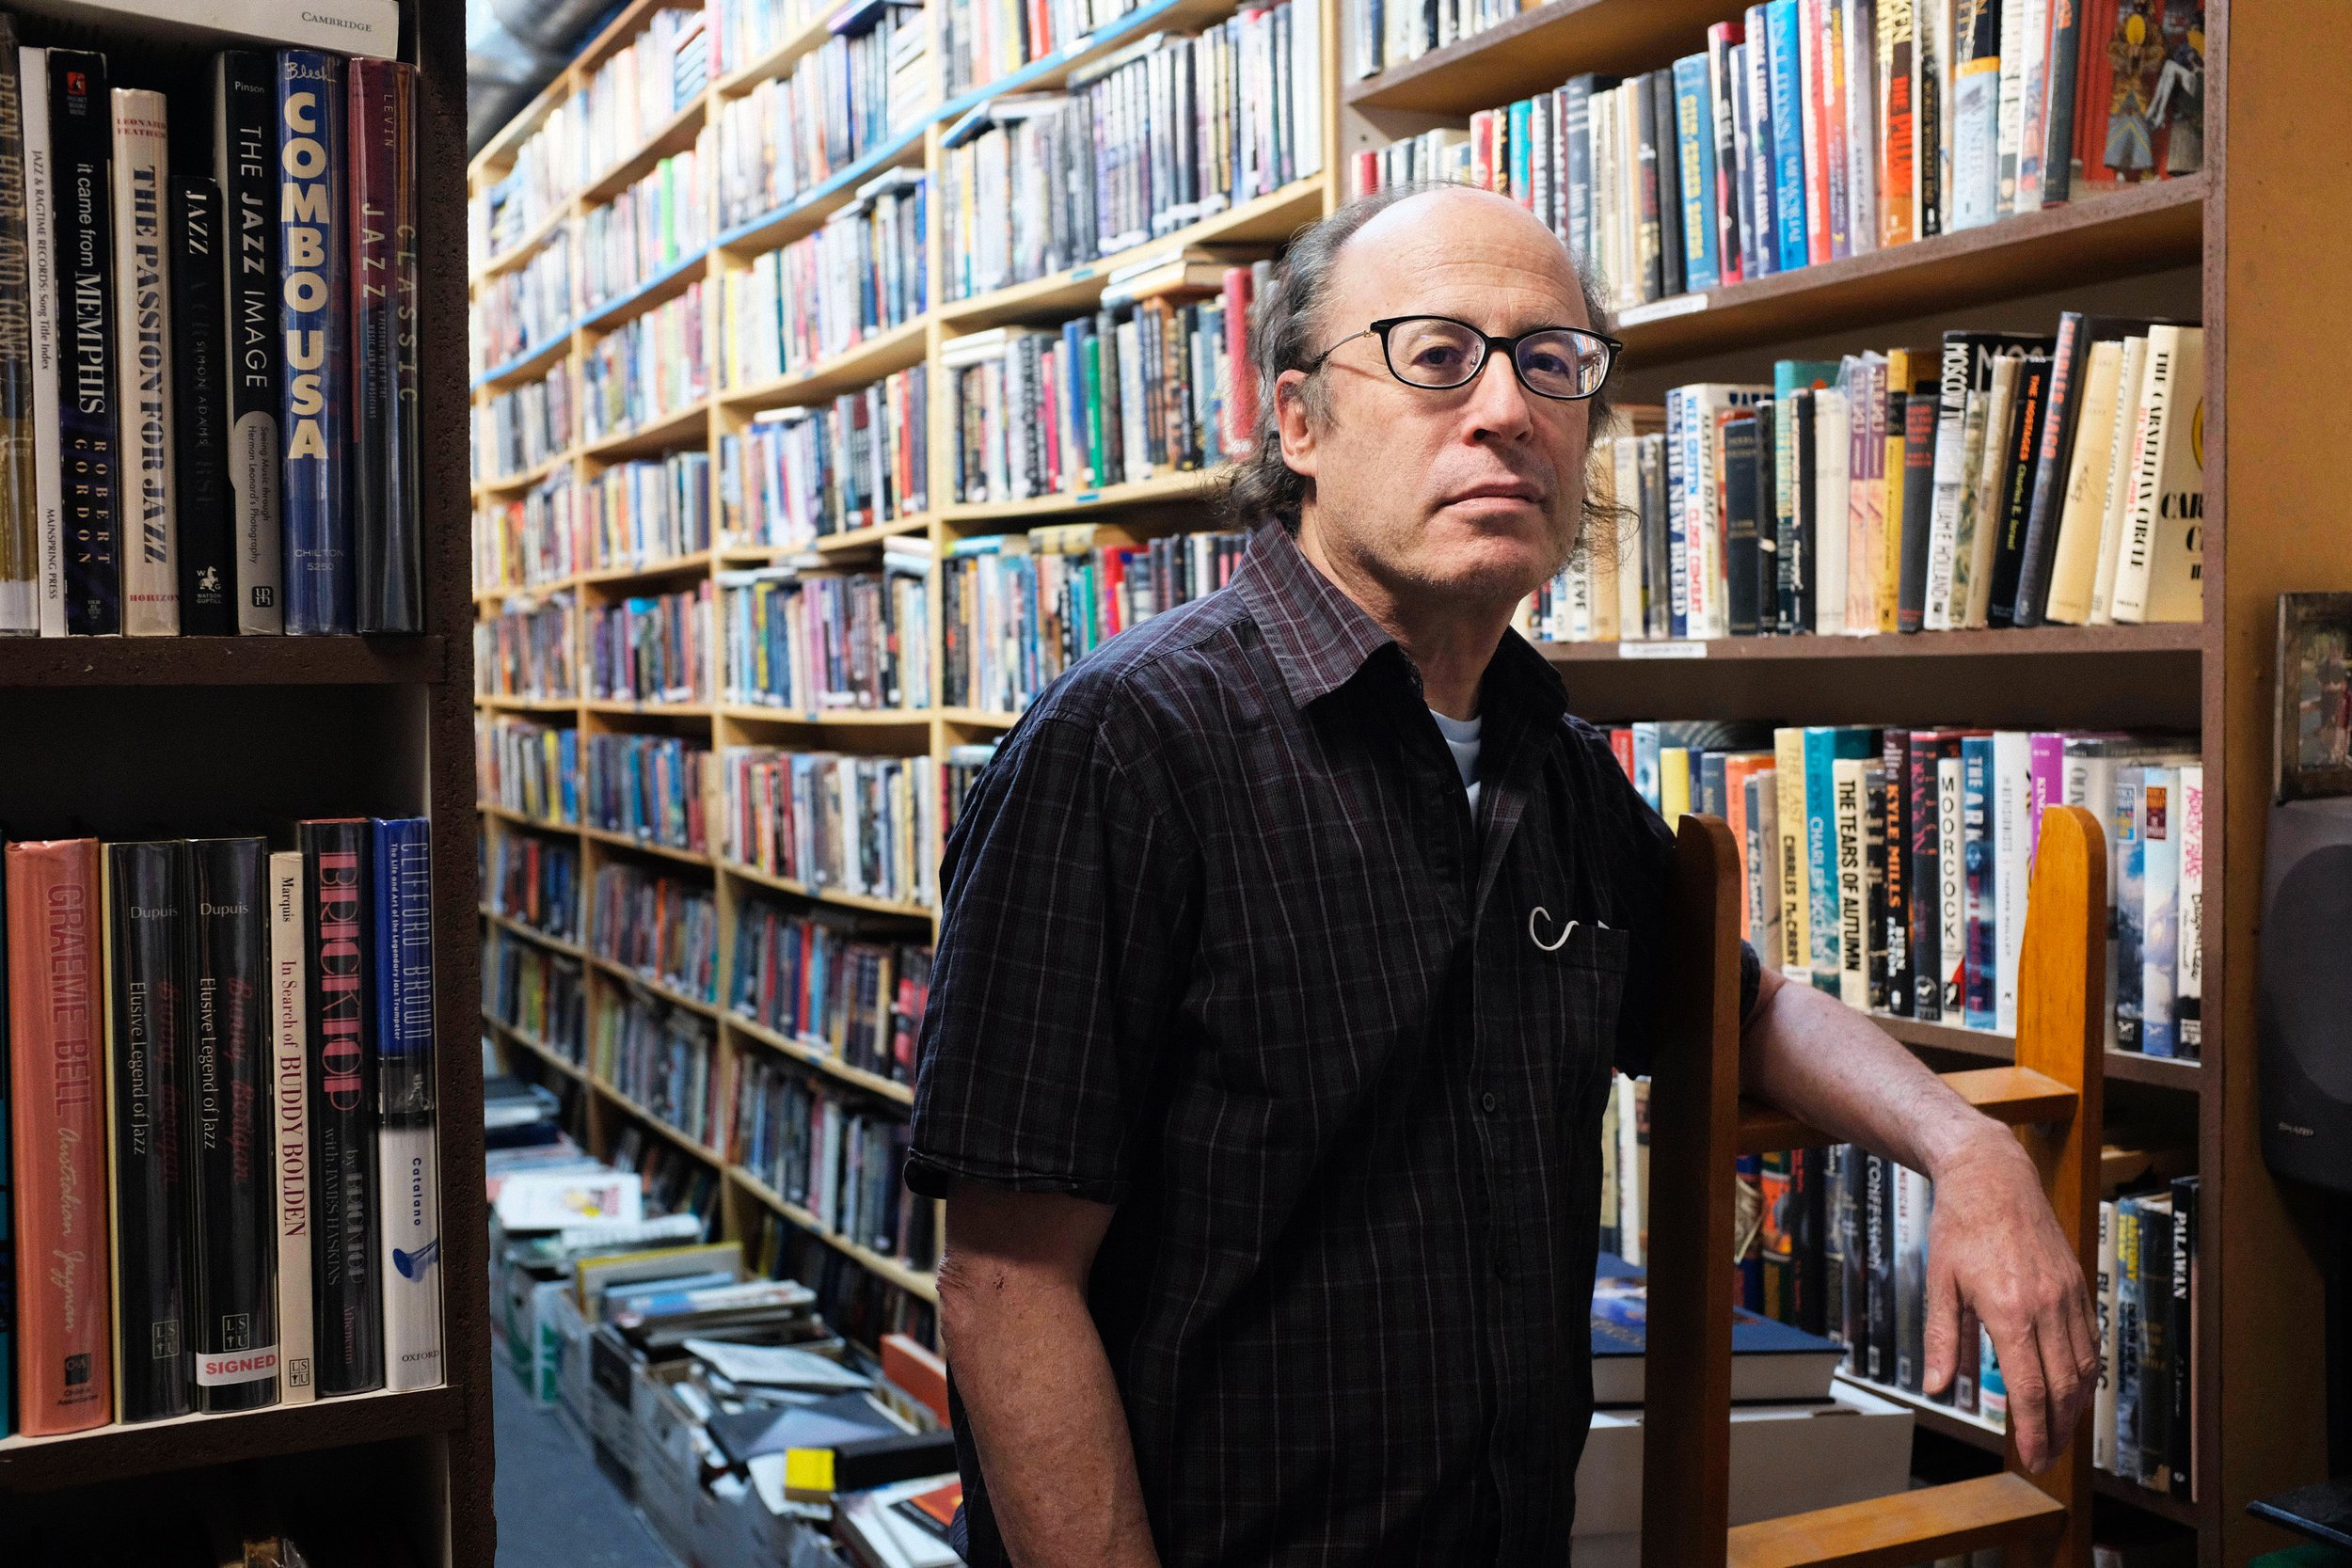  Barry Lancet (cq) visits from Tokyo and stops by David Kaye’s book store to have the owner price a selection that he has collected.  Lancet himself is an author, and regular of David Kaye’s bookstore whenever he visits Los Angles. David Kaye Booksto